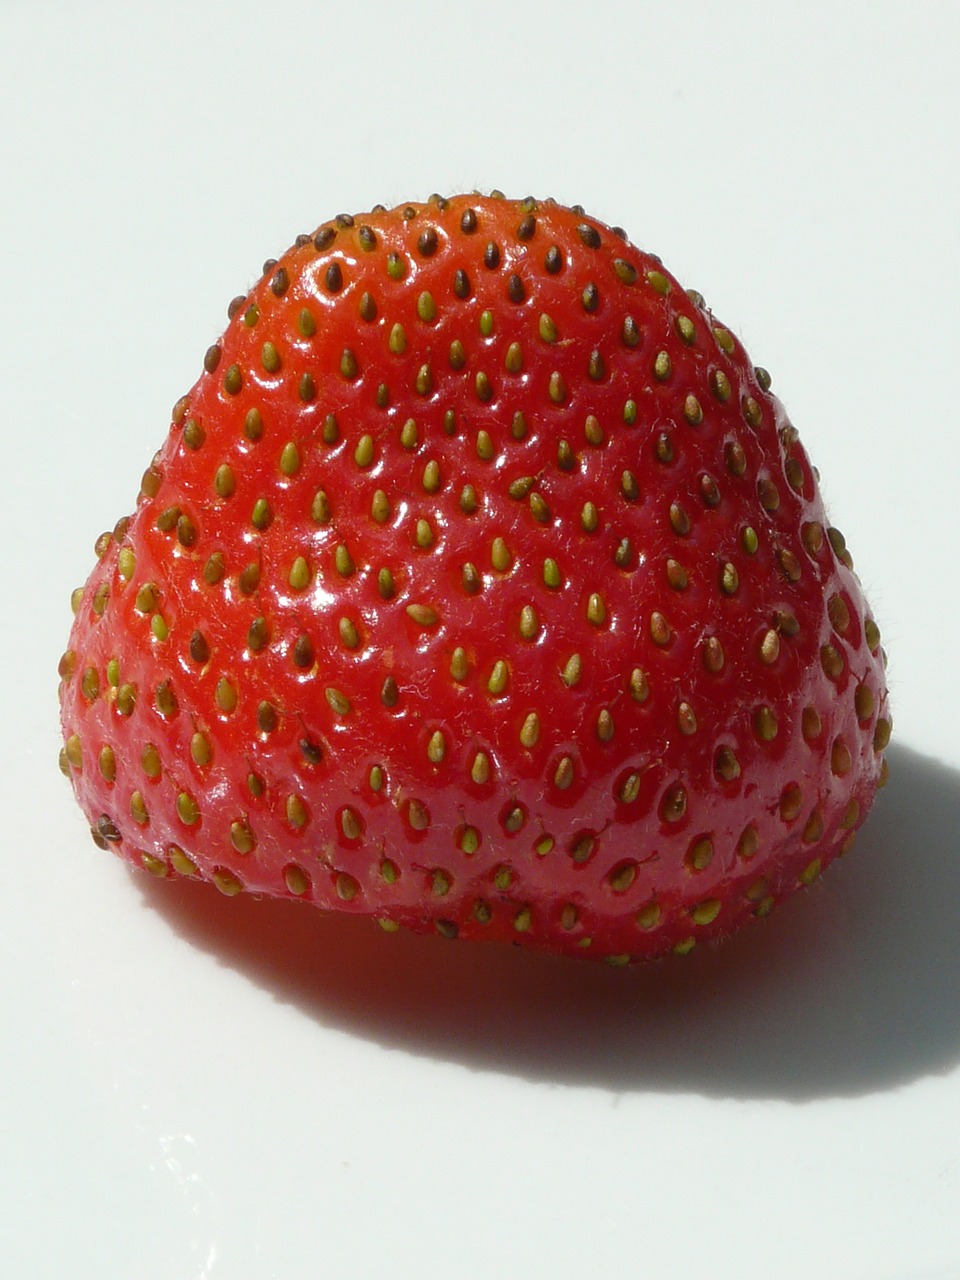 strawberries fruity red free photo